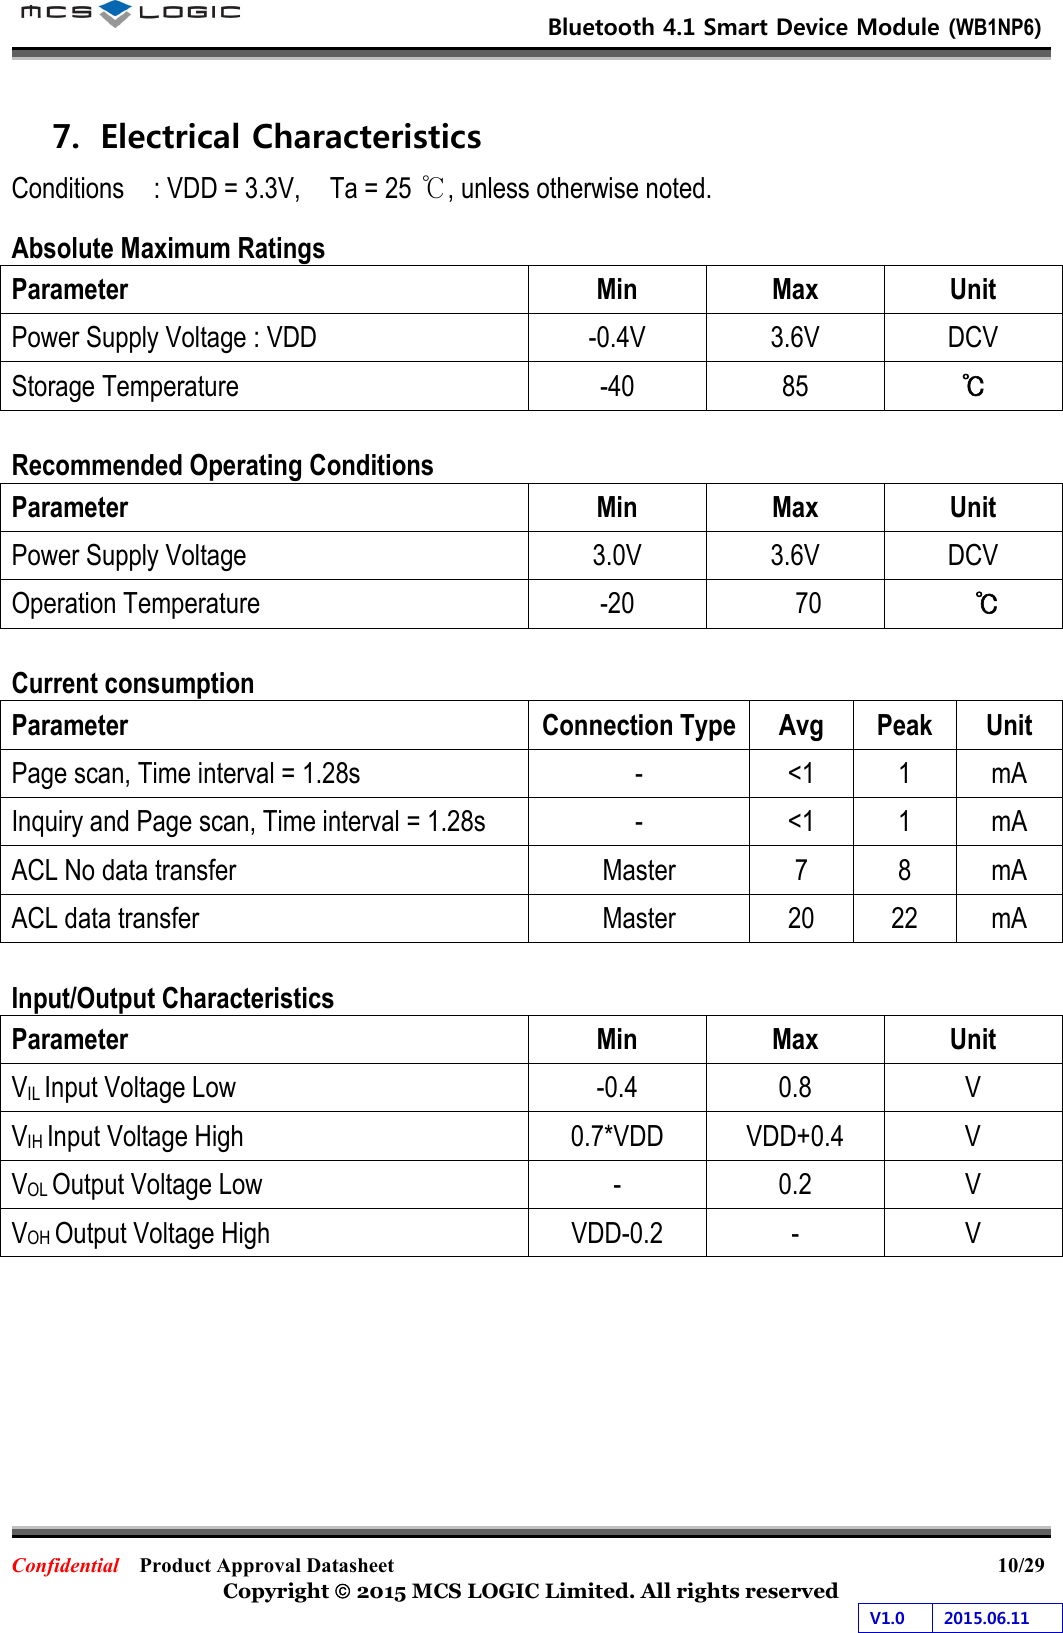                           Bluetooth 4.1 Smart Device Module (WB1NP6)                         Confidential    Product Approval Datasheet                                                           10/29 Copyright  2015 MCS LOGIC Limited. All rights reserved V1.0  2015.06.11  7. Electrical Characteristics Conditions    : VDD = 3.3V,    Ta = 25 ℃, unless otherwise noted.  Absolute Maximum Ratings Parameter  Min  Max  Unit Power Supply Voltage : VDD  -0.4V  3.6V  DCV Storage Temperature  -40  85  ℃  Recommended Operating Conditions Parameter  Min  Max  Unit Power Supply Voltage  3.0V  3.6V  DCV Operation Temperature  -20  70  ℃  Current consumption Parameter  Connection Type  Avg  Peak  Unit Page scan, Time interval = 1.28s  -  &lt;1  1  mA Inquiry and Page scan, Time interval = 1.28s  -  &lt;1  1  mA ACL No data transfer  Master  7  8  mA ACL data transfer  Master  20  22  mA  Input/Output Characteristics Parameter  Min  Max  Unit VIL Input Voltage Low  -0.4  0.8  V VIH Input Voltage High  0.7*VDD  VDD+0.4  V VOL Output Voltage Low  -  0.2  V VOH Output Voltage High  VDD-0.2  -  V          